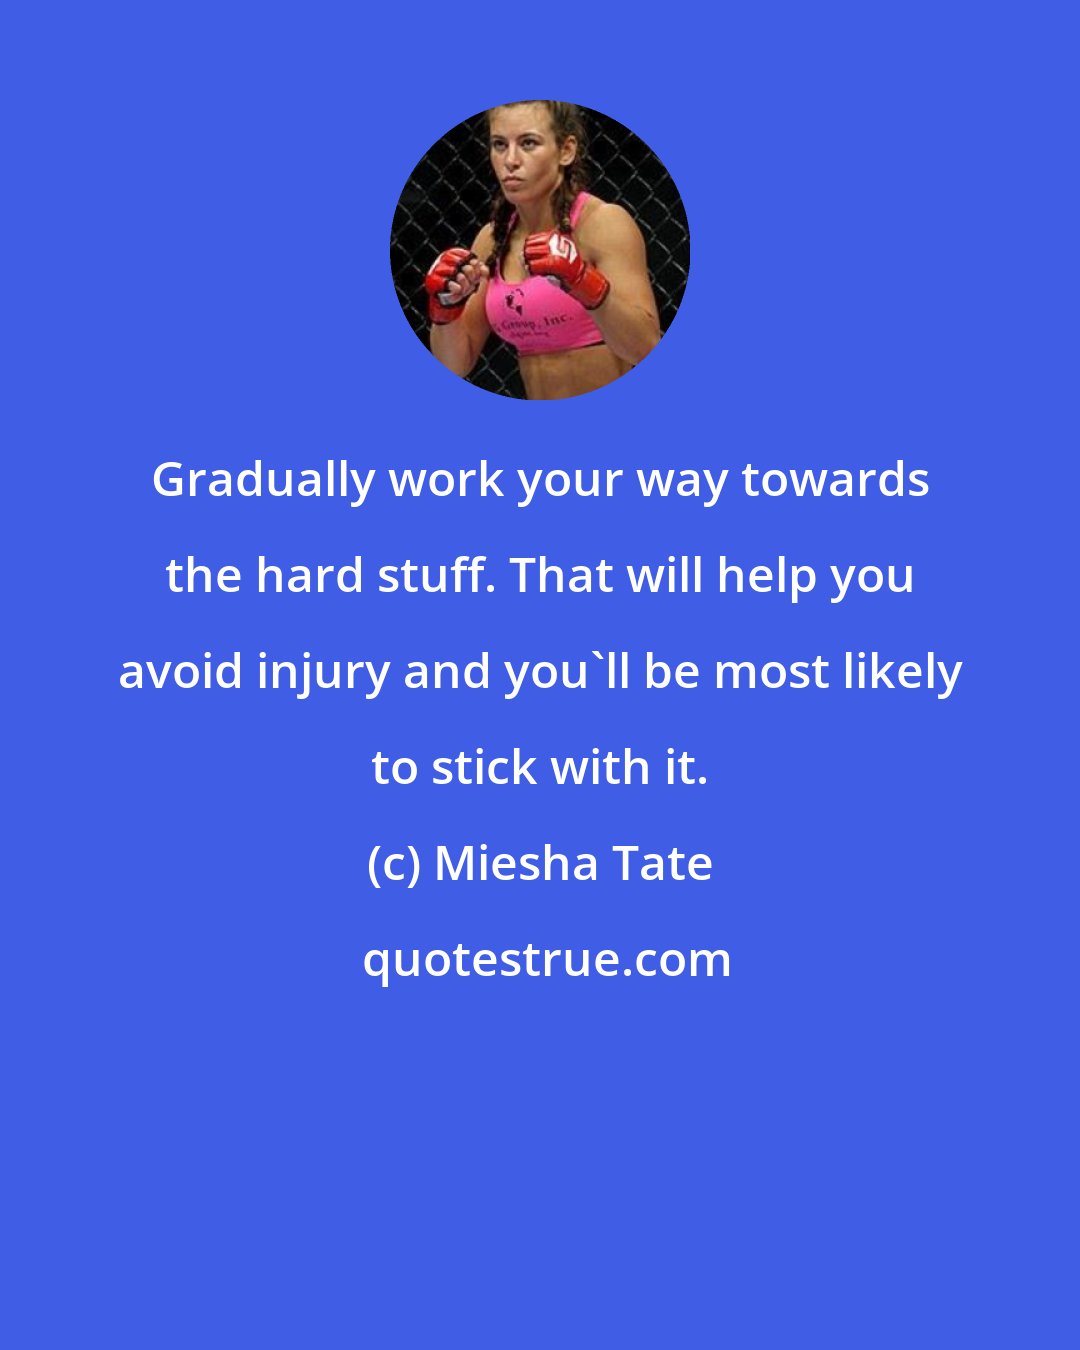 Miesha Tate: Gradually work your way towards the hard stuff. That will help you avoid injury and you'll be most likely to stick with it.